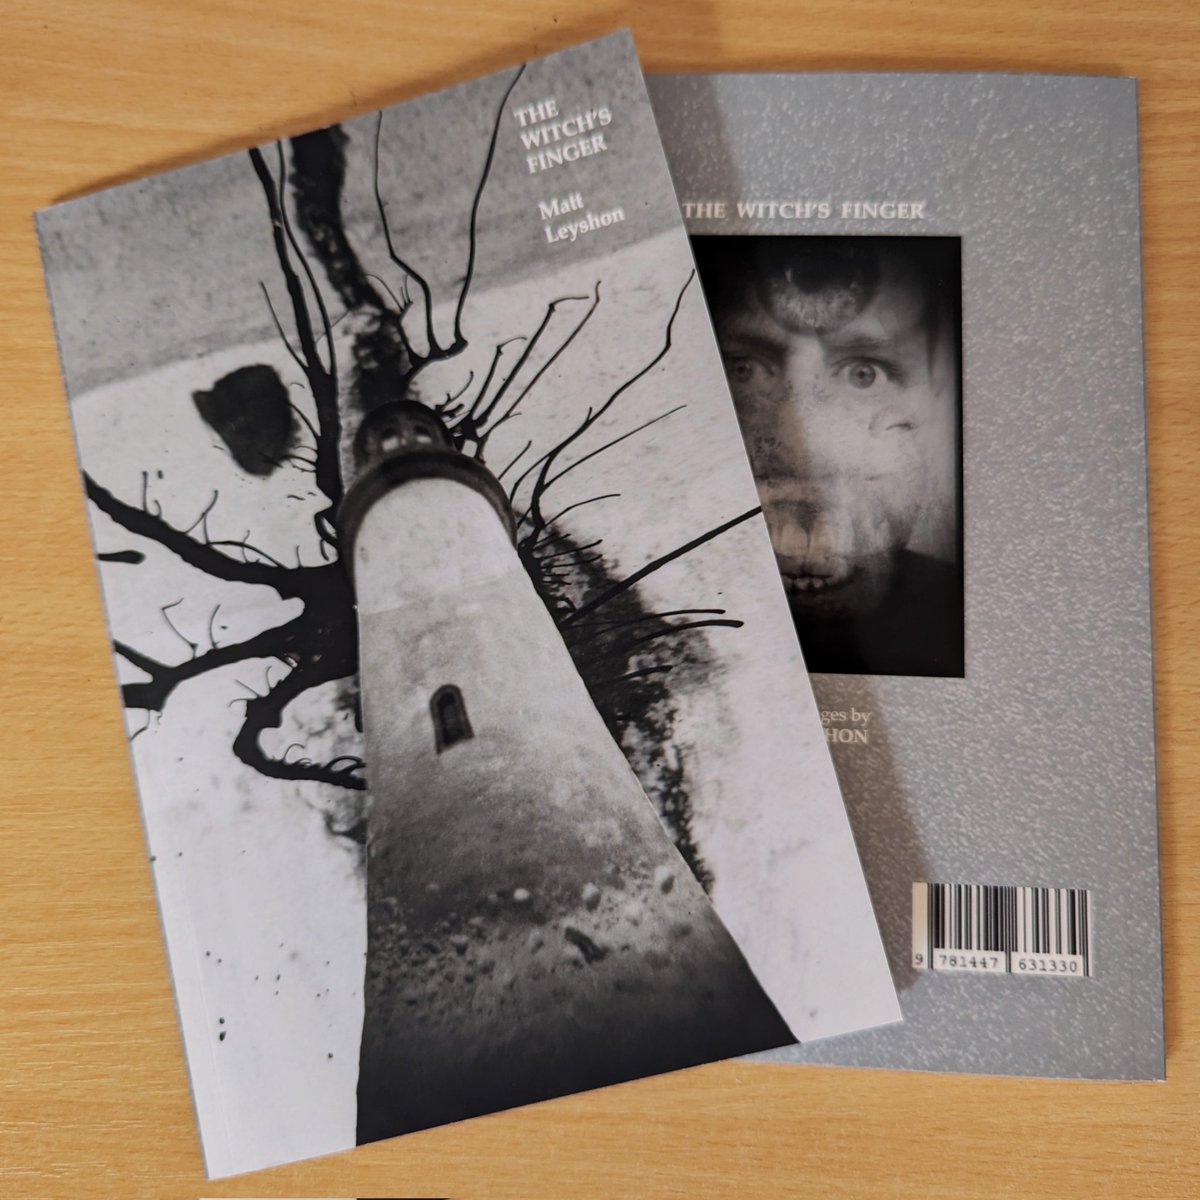 I've 2 new books out this month. Whereunto The Said Spirit Said: They Are The Pictures & The Witch's Finger.
Both available from @incunabulamedia
#witches #lighthouse #virginiawoolf #tothelighthouse #pendlewitches